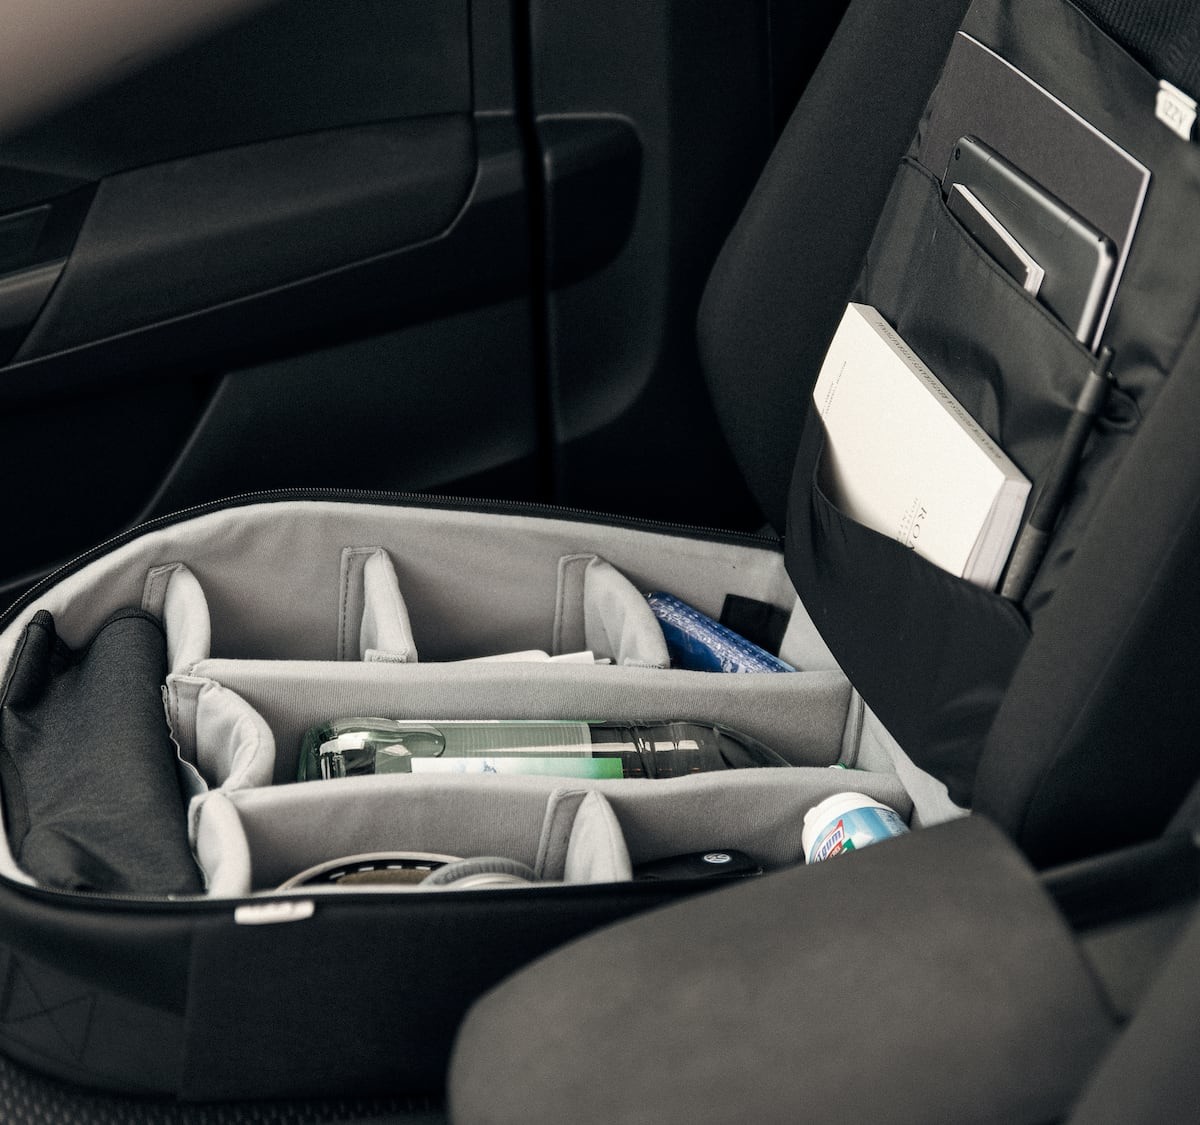 izzy smart car organizer is a flexible bag for your vehicle